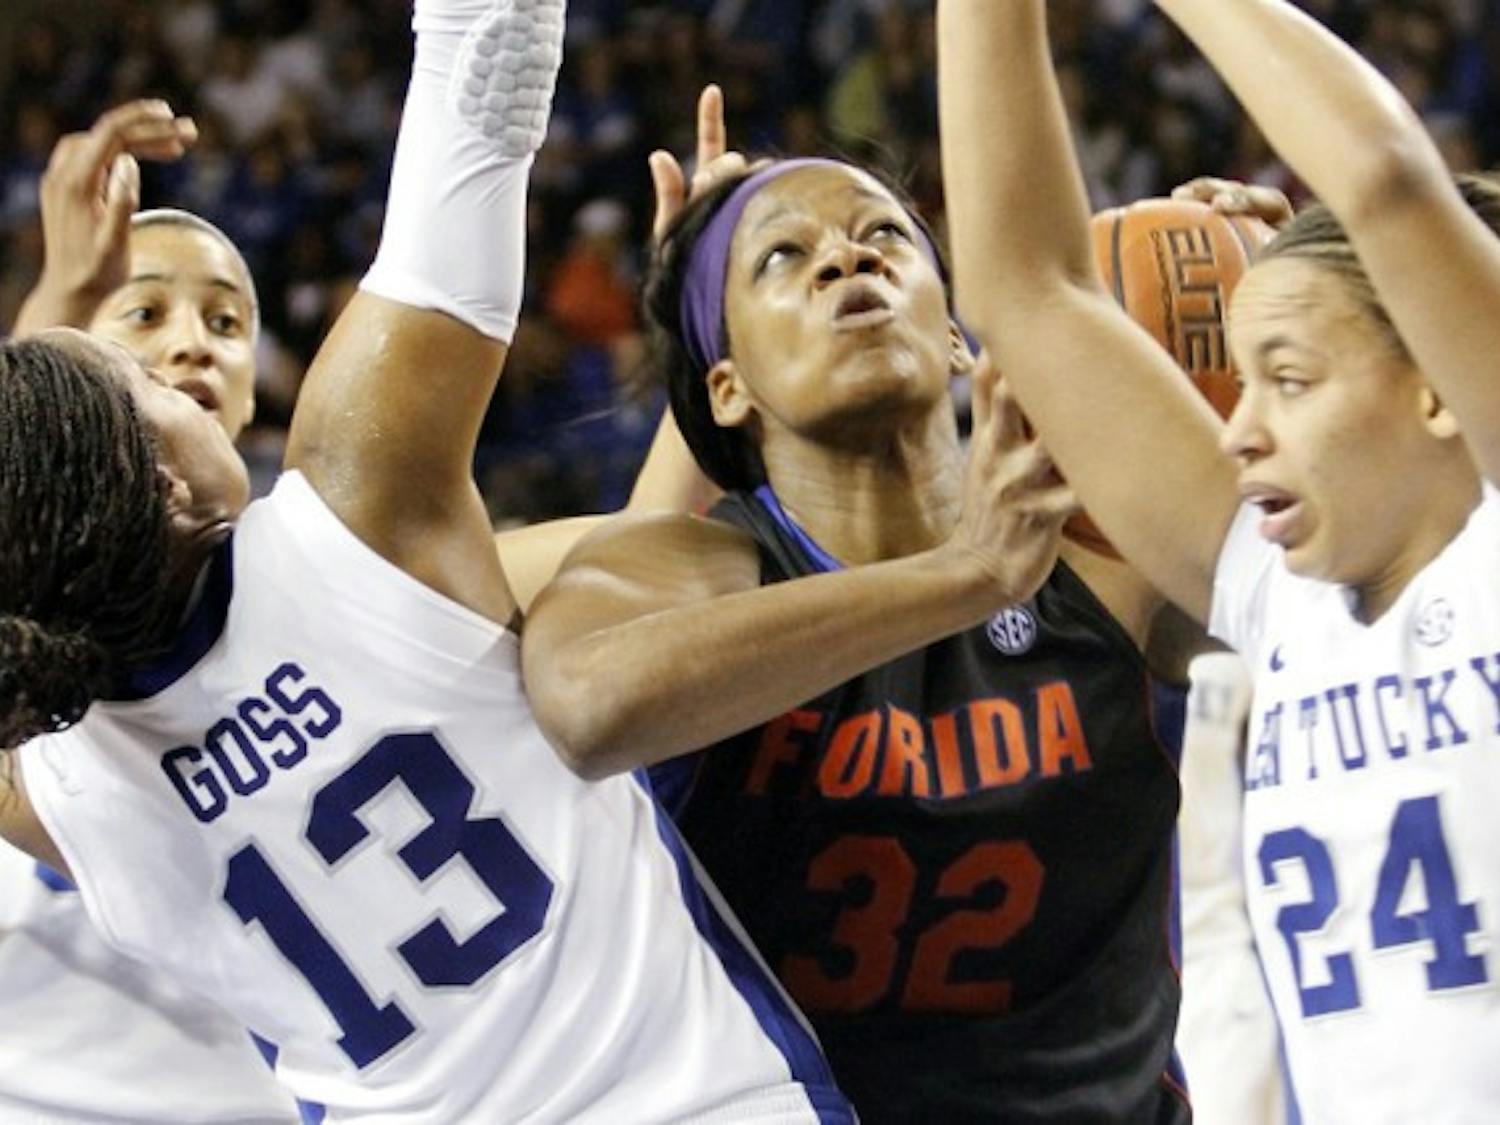 Forward Jennifer George (32) battles in the paint with Kentucky guards Amber Smith (24) and Bria Goss during the Gators 57-52 loss to the Wildcats in Lexington, Ky., on Sunday. Florida has lost three straight to Kentucky.